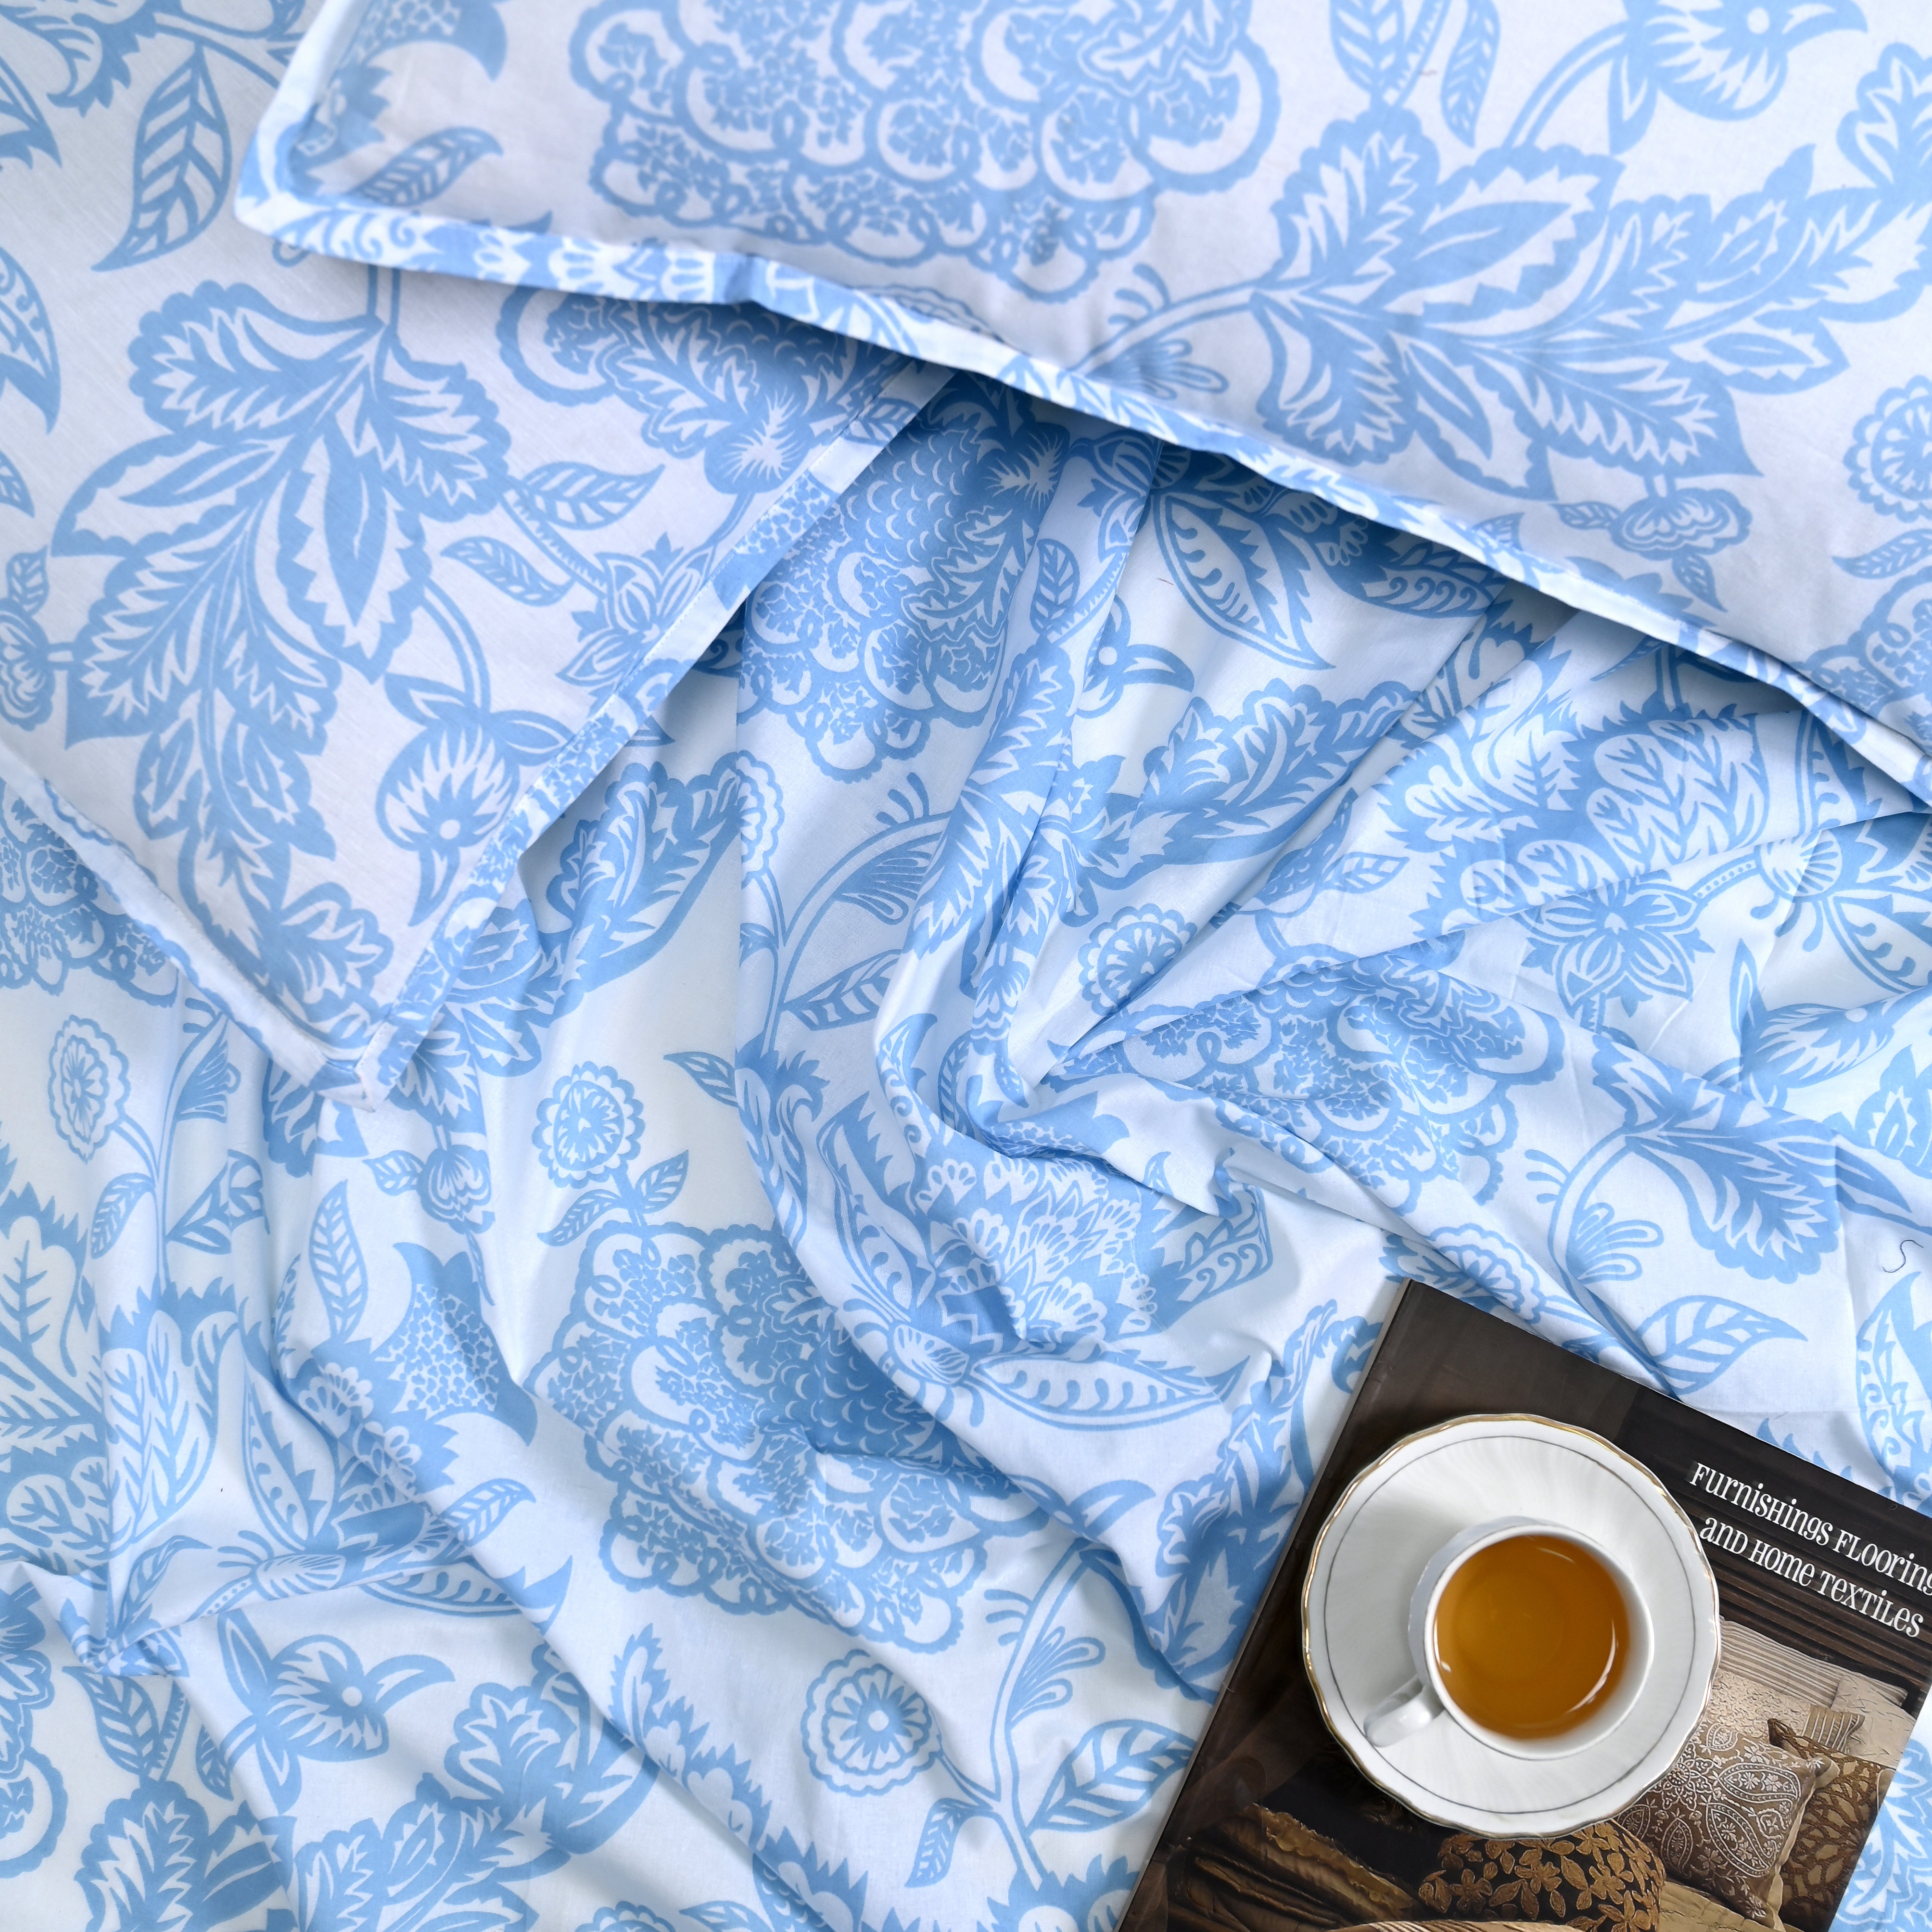 Calico Bed Sheet